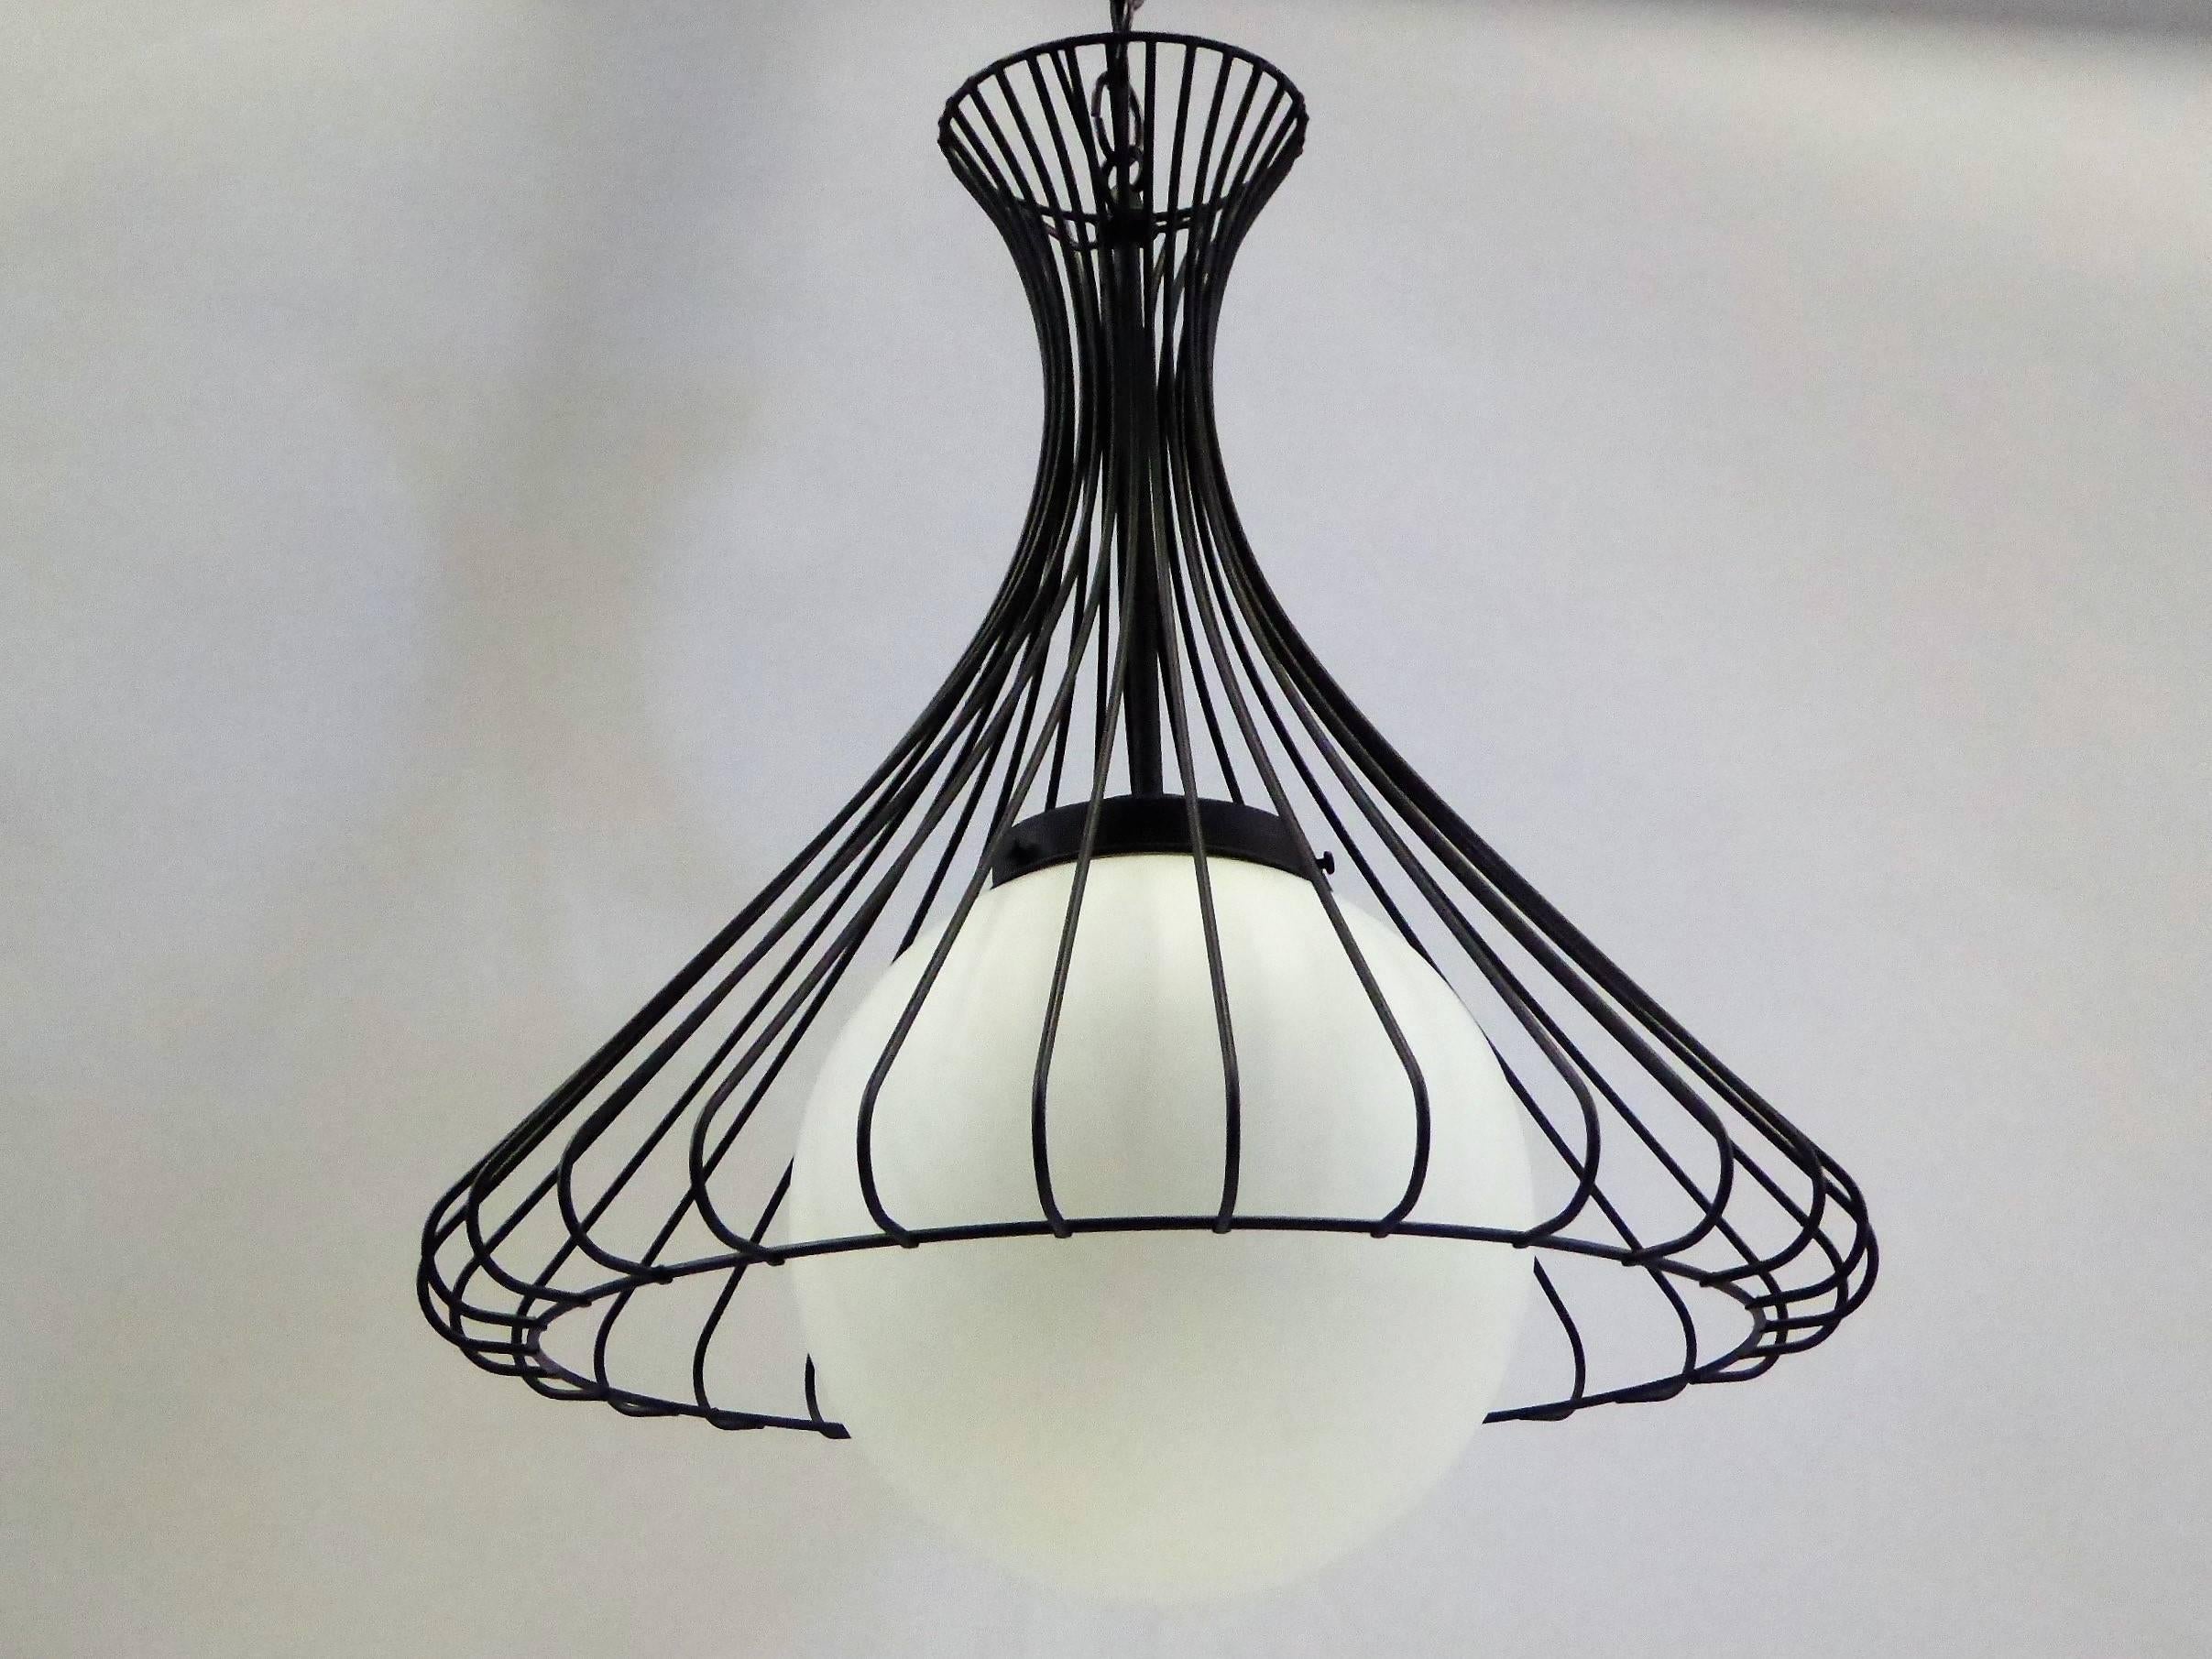 With a 1950s flair, this pendant chandelier has a steel wire bell shaped cage over a white satin glass globe. Rewired, restored and with new UL brass inner socket. Takes single medium base bulb, 75 watts max.
The fixture is 20 inches in diameter and